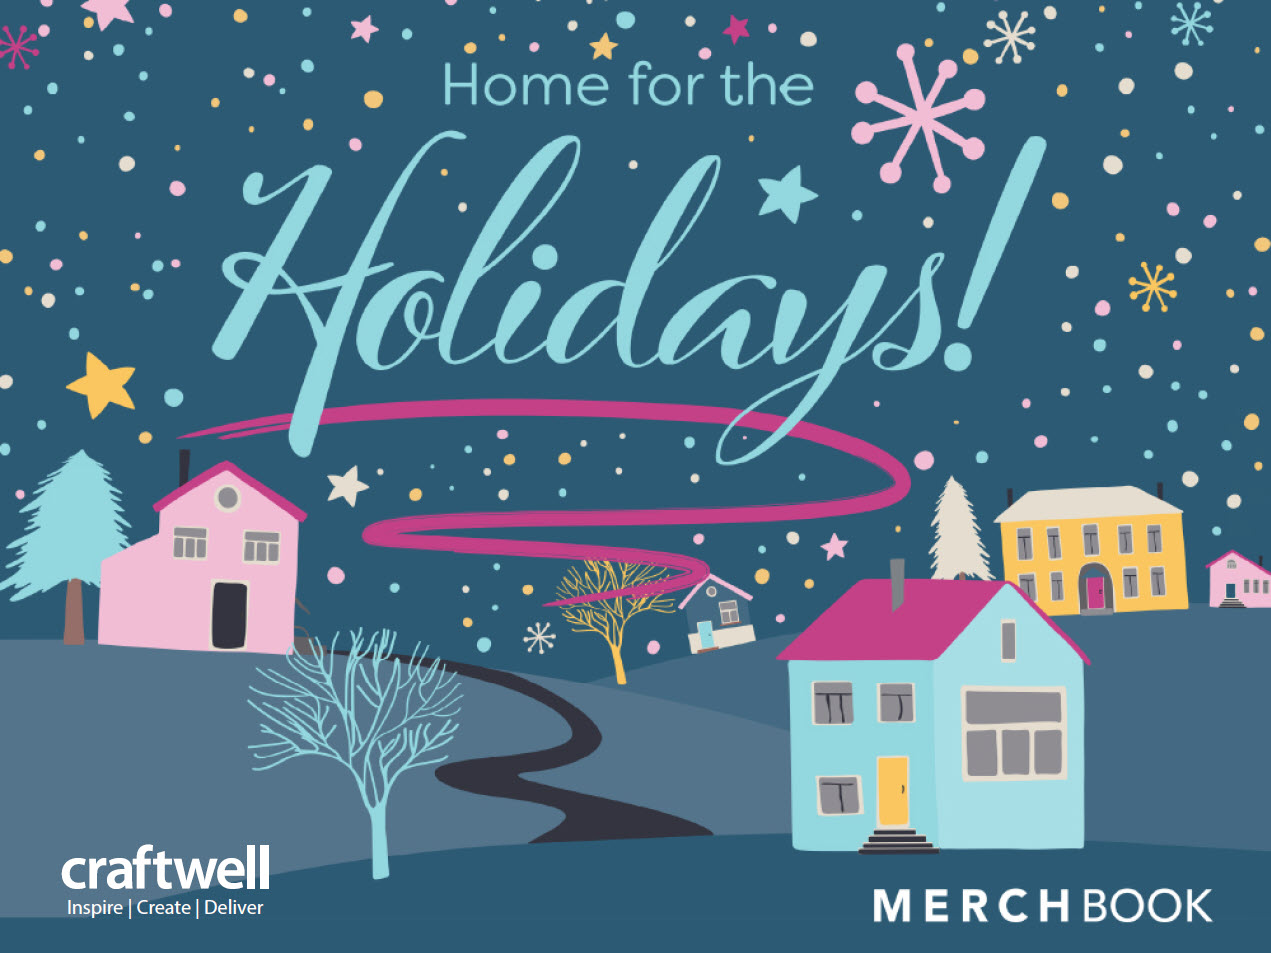 Merchful - Home for the  Holidays.jpg